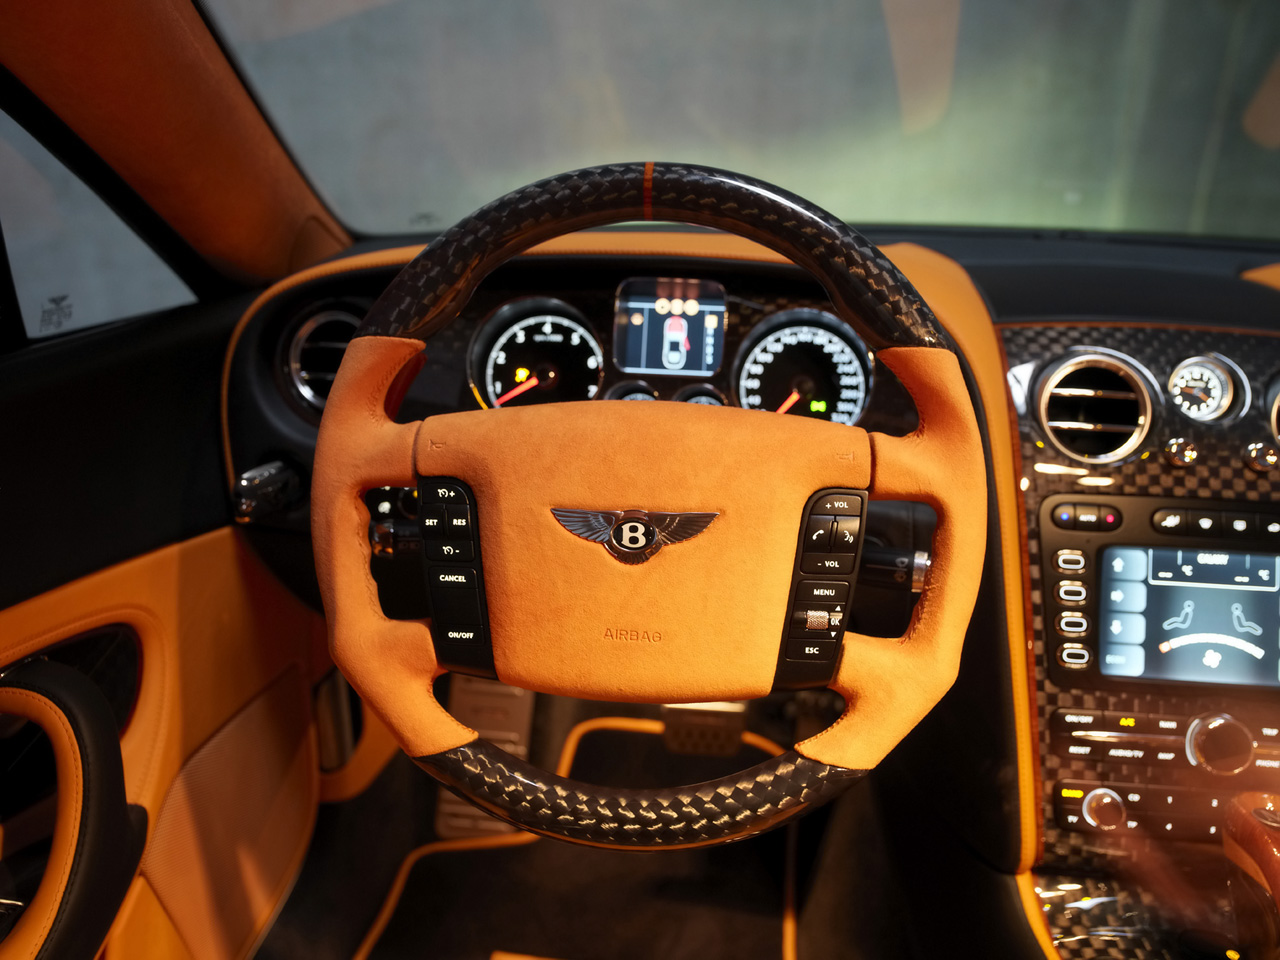     2008-Le-Mansory-Bentley-Continental-GT-Dashboard-1280x960